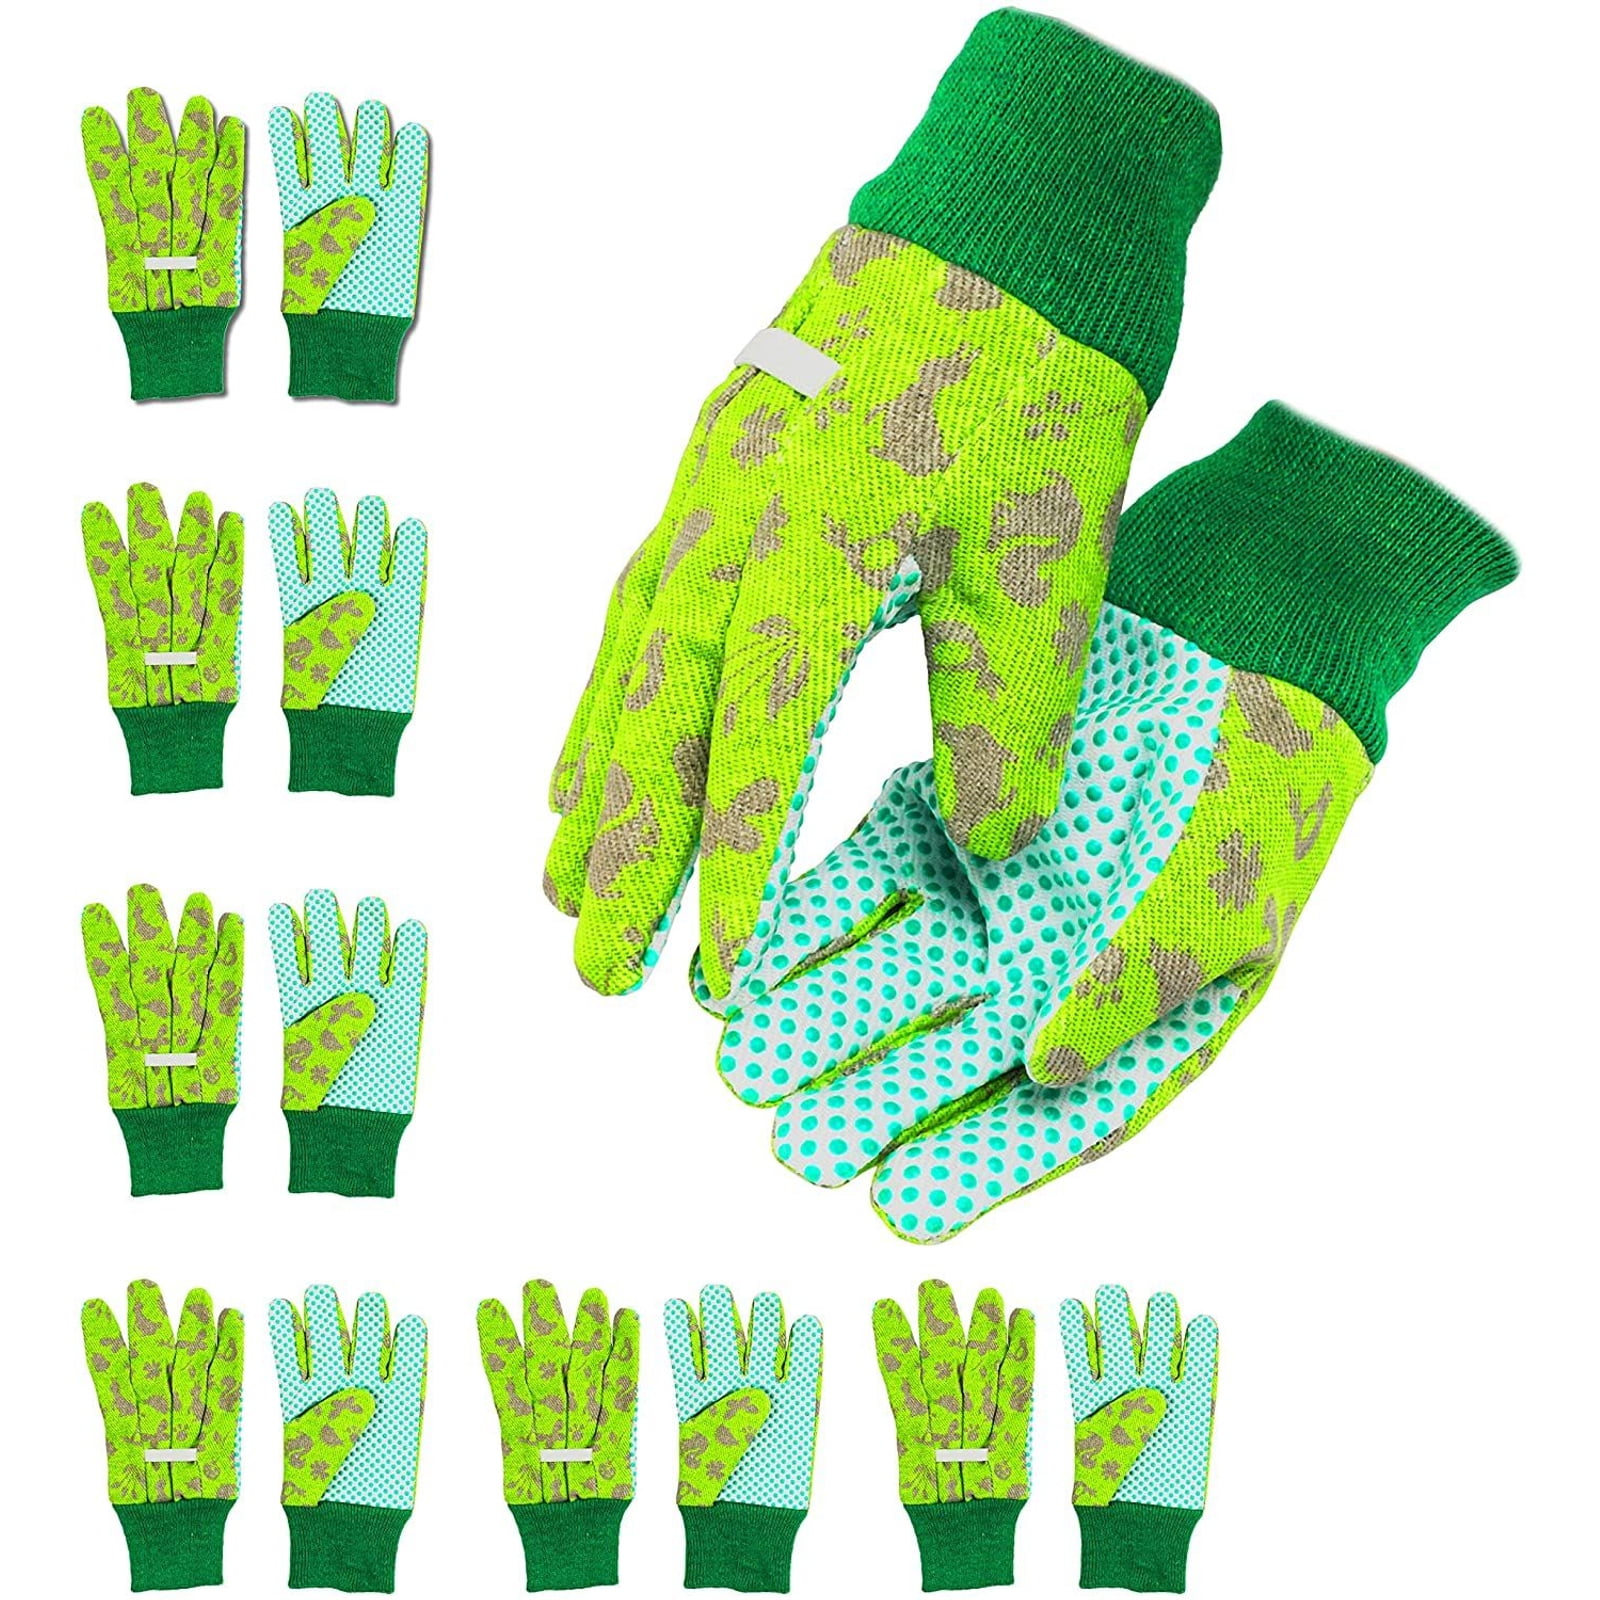 NWT Gardening Gloves Veggies Fruits Multicolor Garden Kids Size Large Ages 8+ 